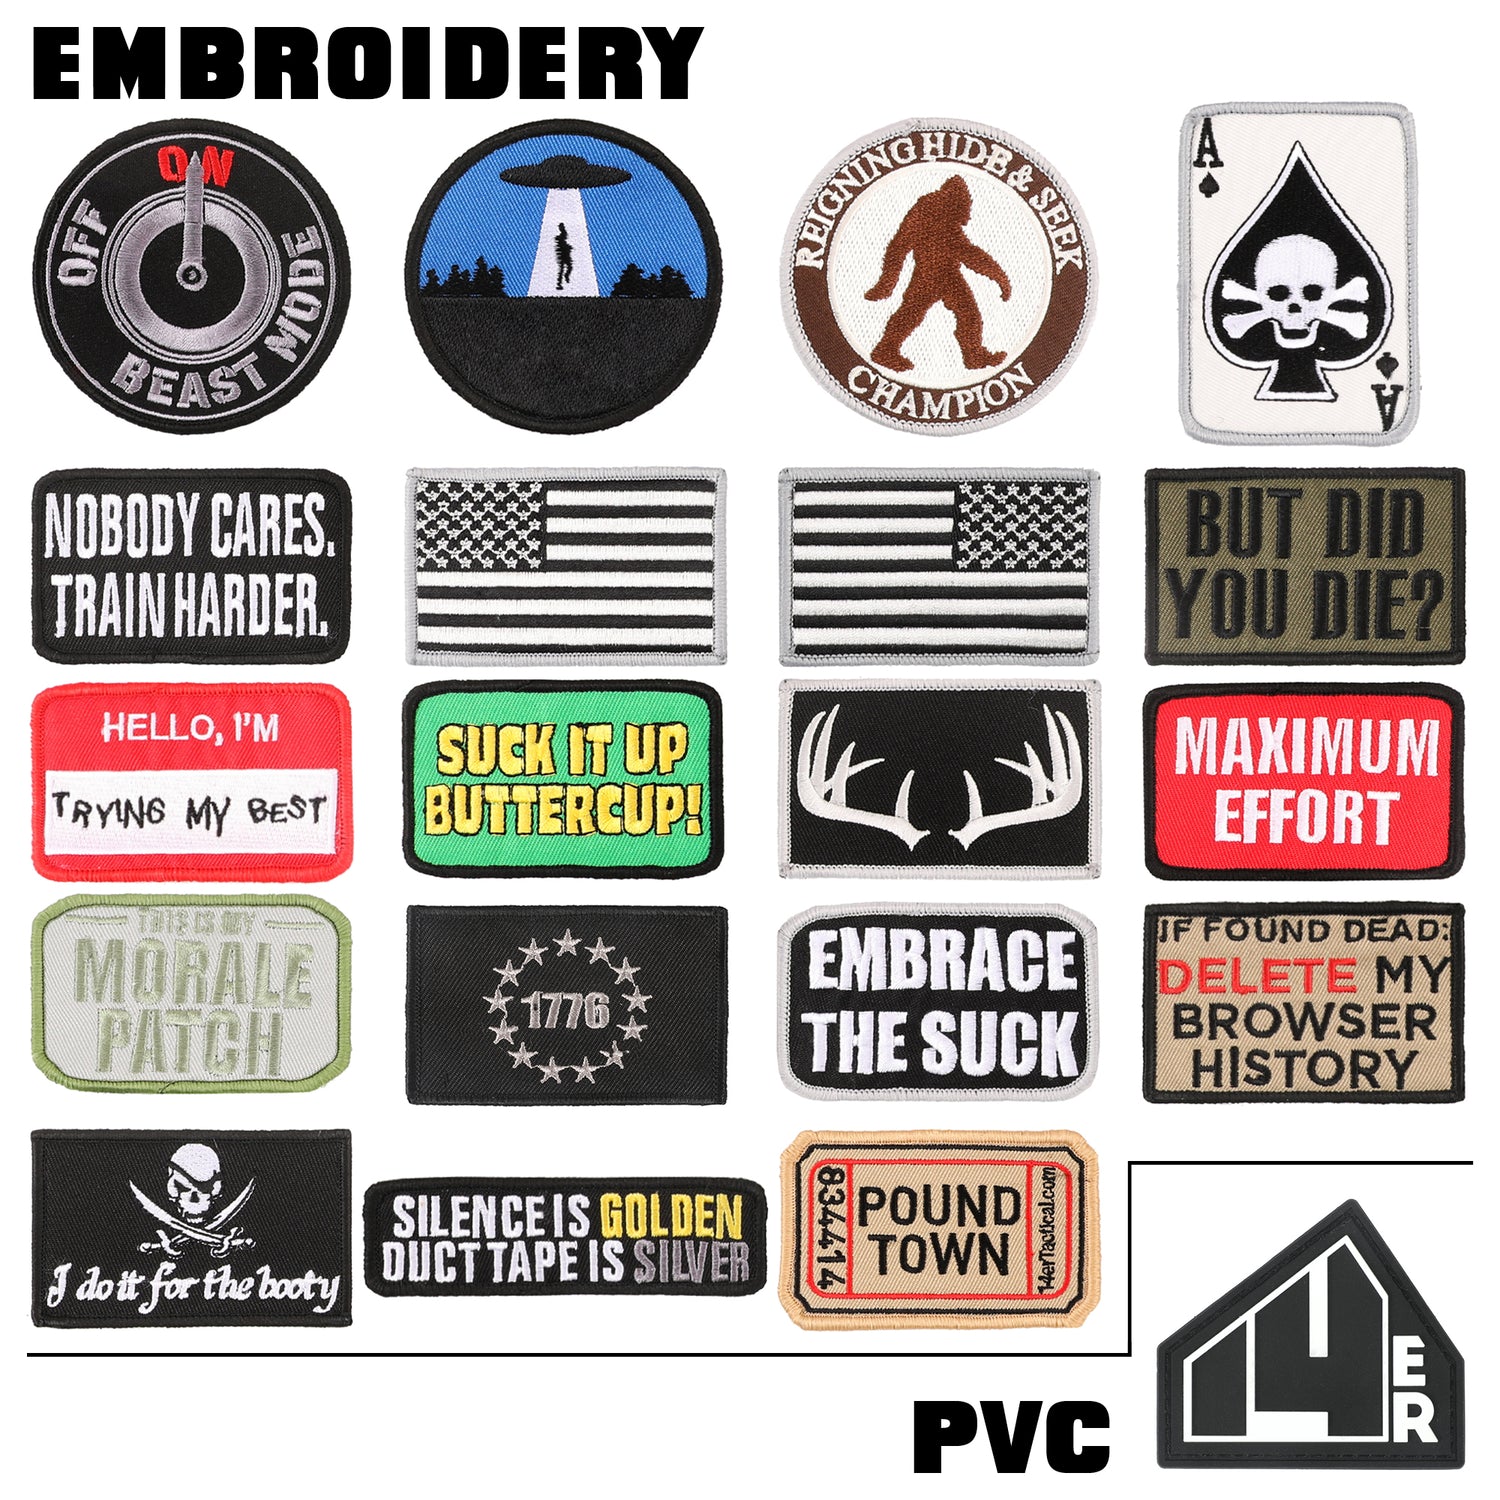 Dearhouse 14er Tactical Morale Patches (14-Pack)